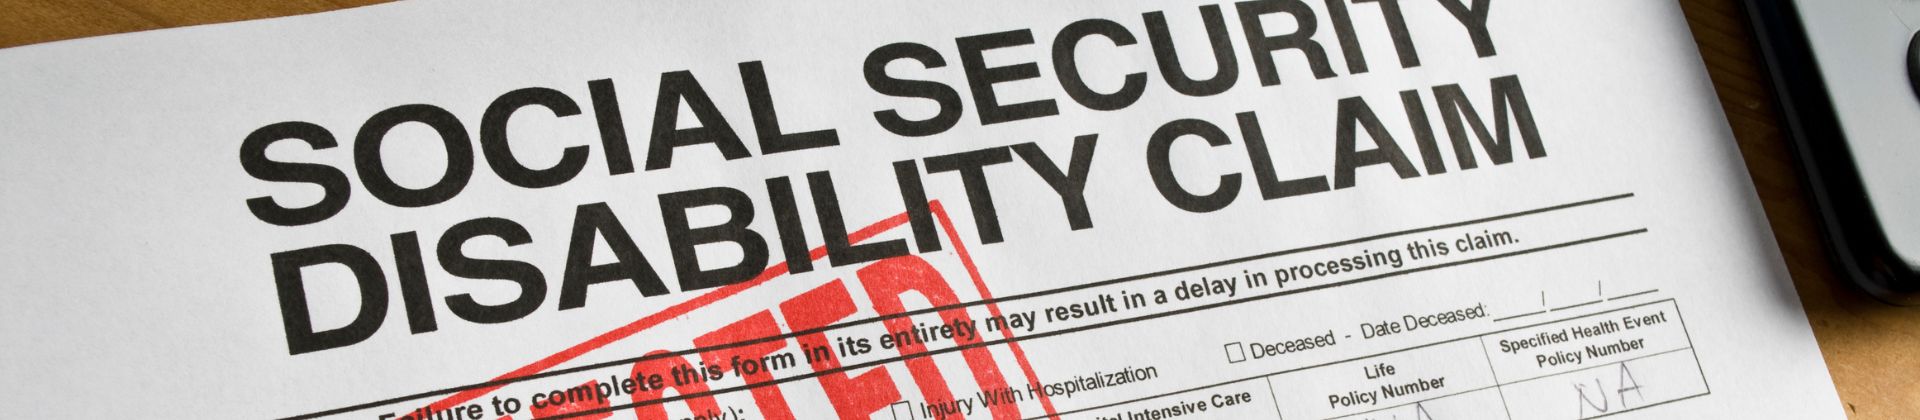 social security disability form that was denies and will need to be appealed